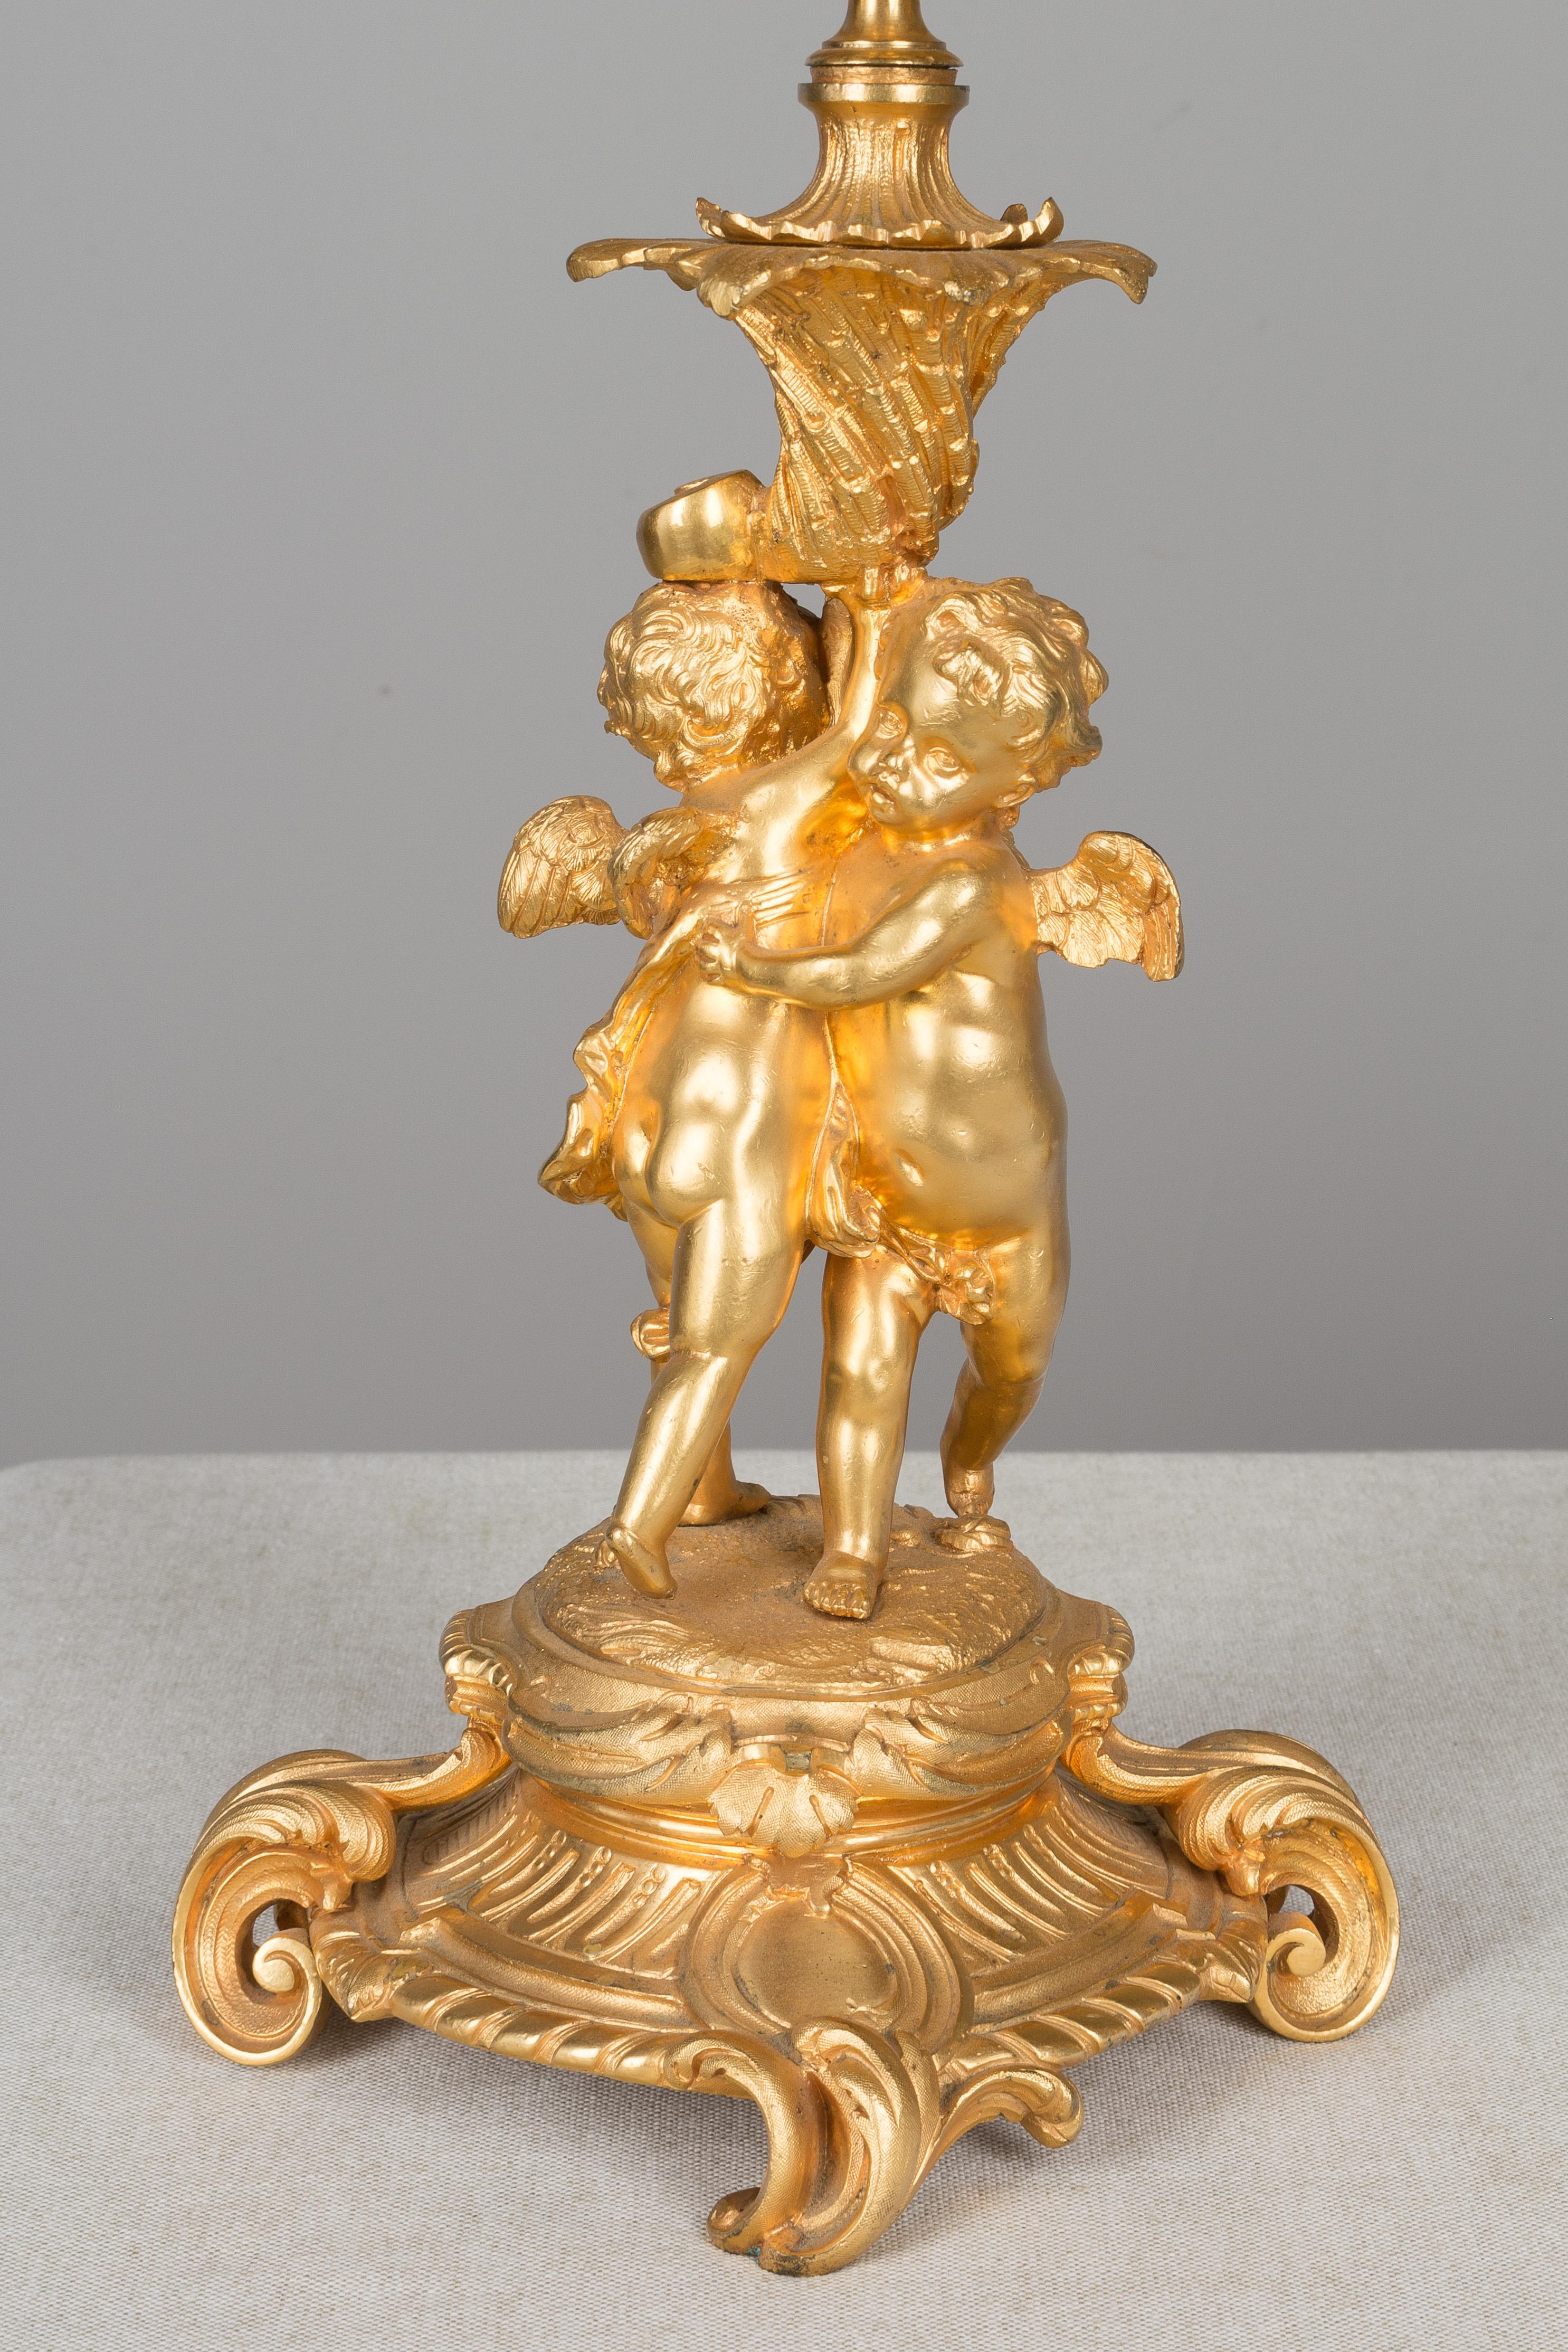 A pair of grand 19th century Louis XV style ormolu candelabra, each constructed in gilt bronze and depicting a pair of putti embracing on a shaped footed base and holding aloft a seven-light candelabra with leaf adorned branches. Finely cast in two